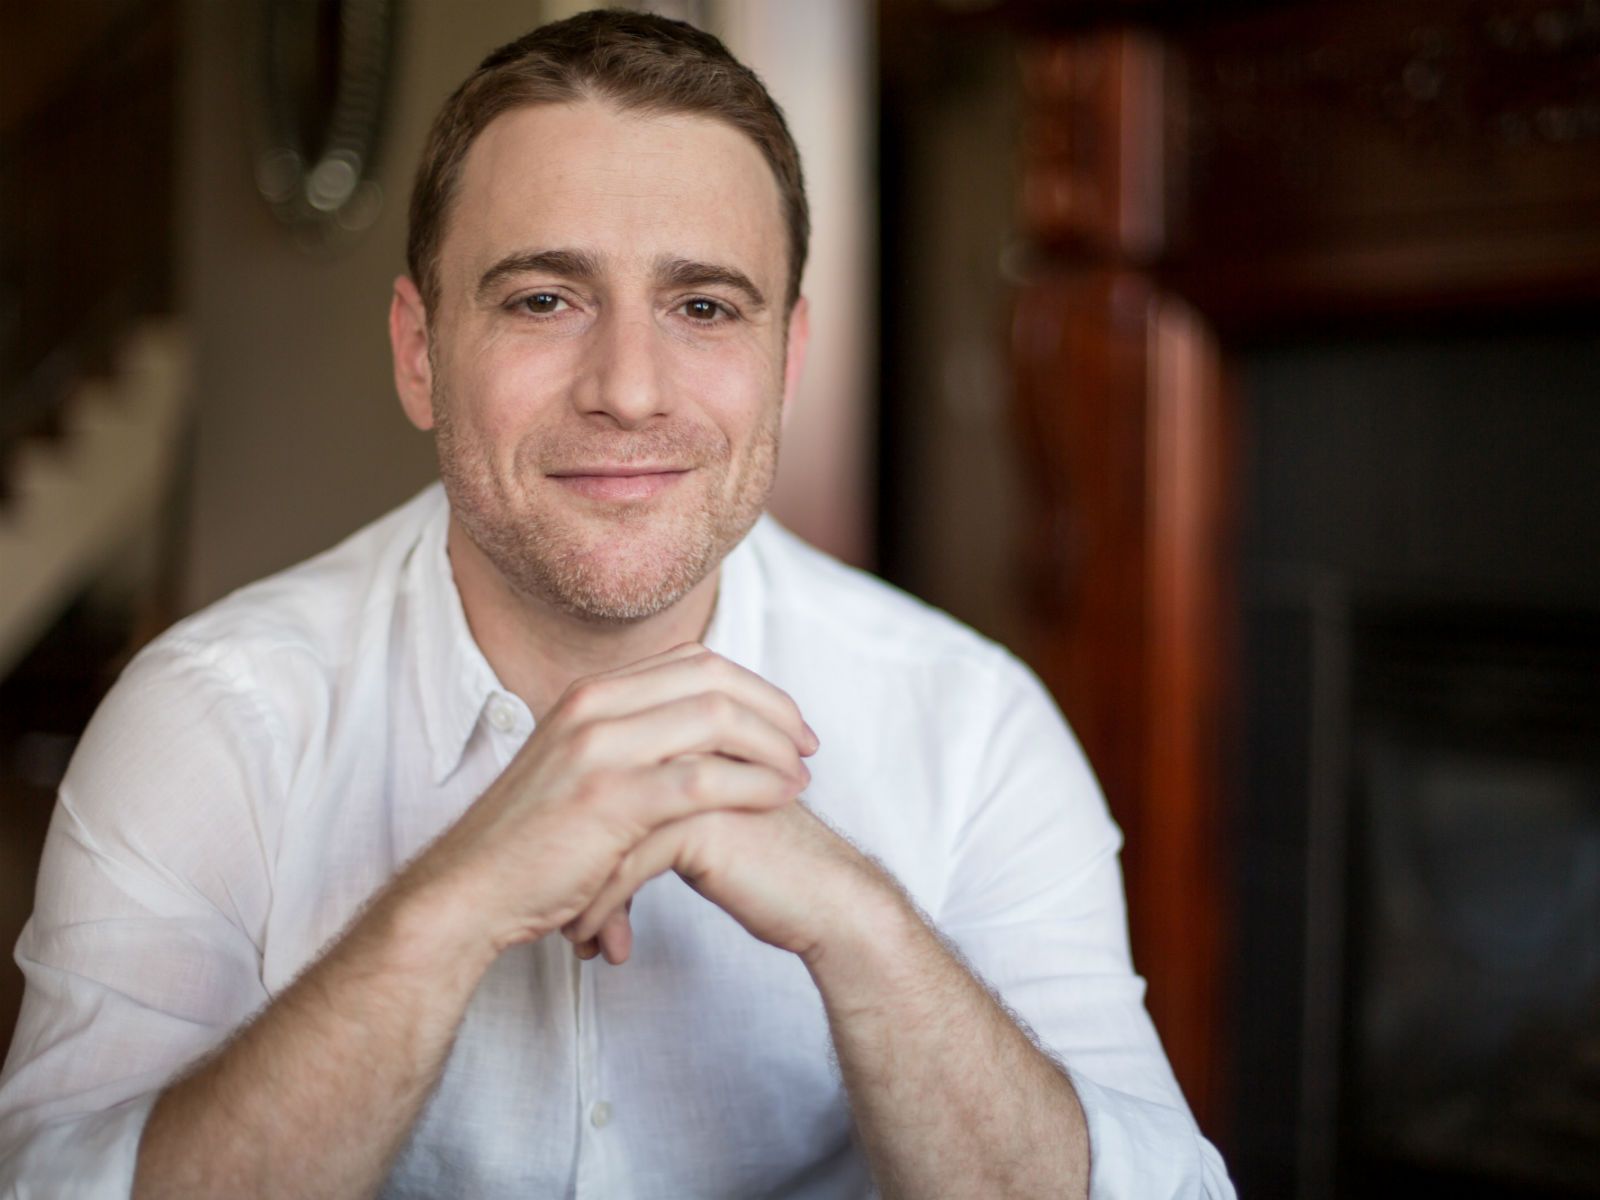 Slack Co-Founder and CEO Stewart Butterfield